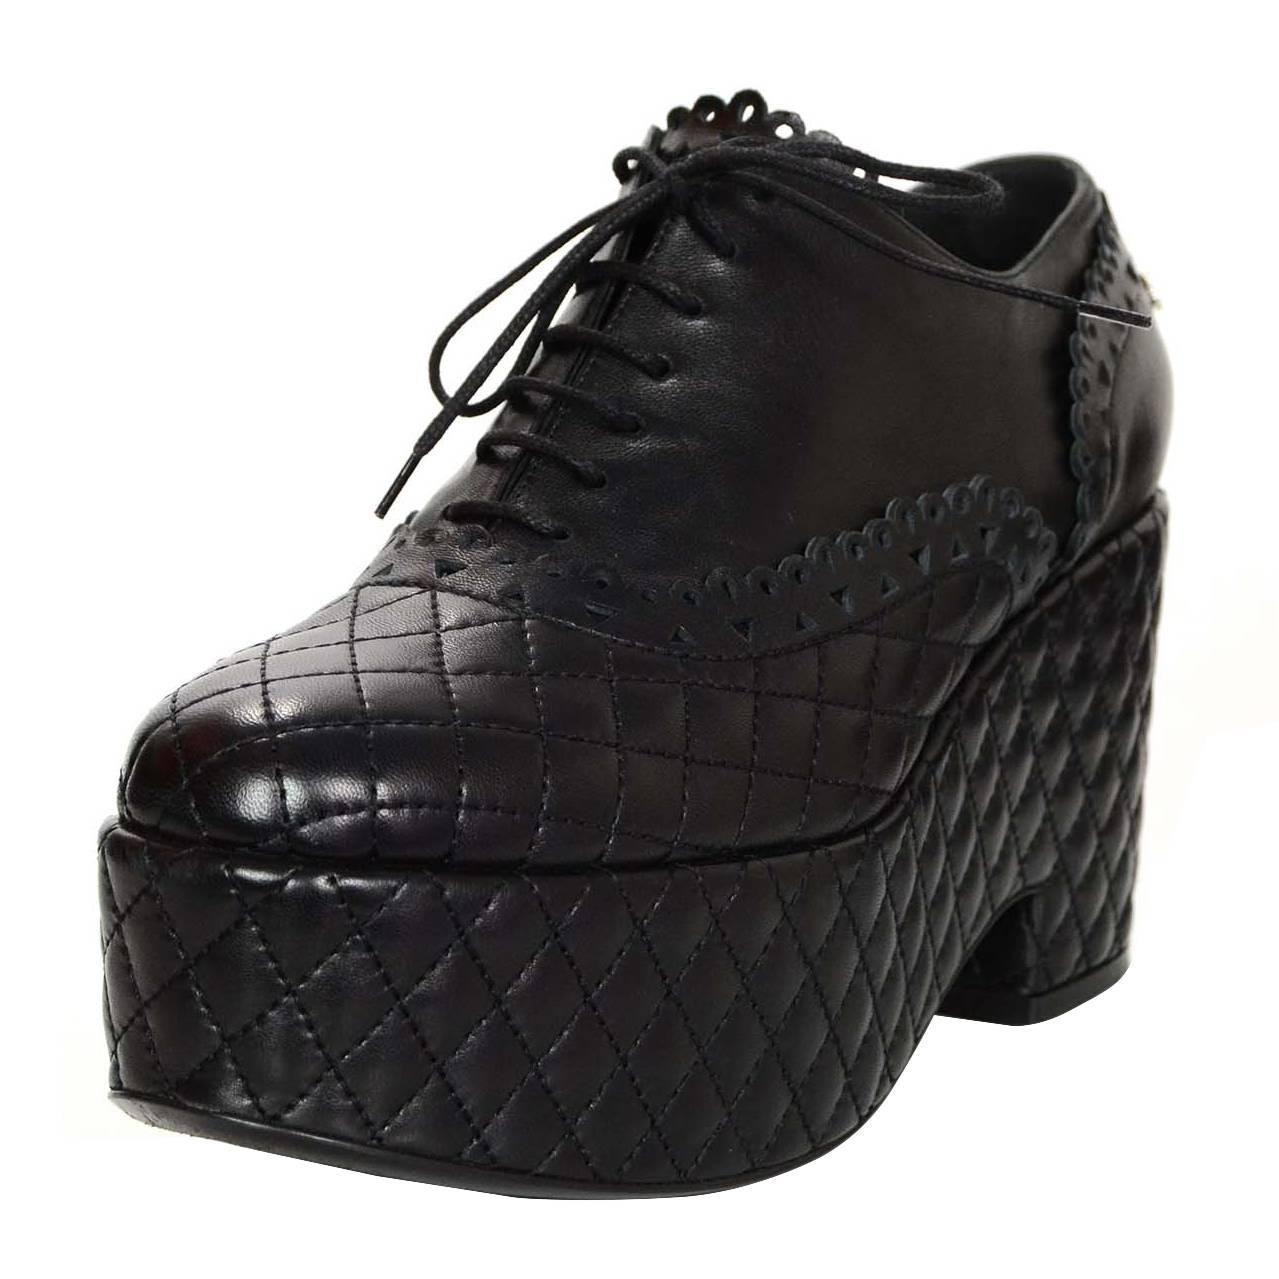 Chanel Black Quilted Oxford Platform Shoes Sz 40.5